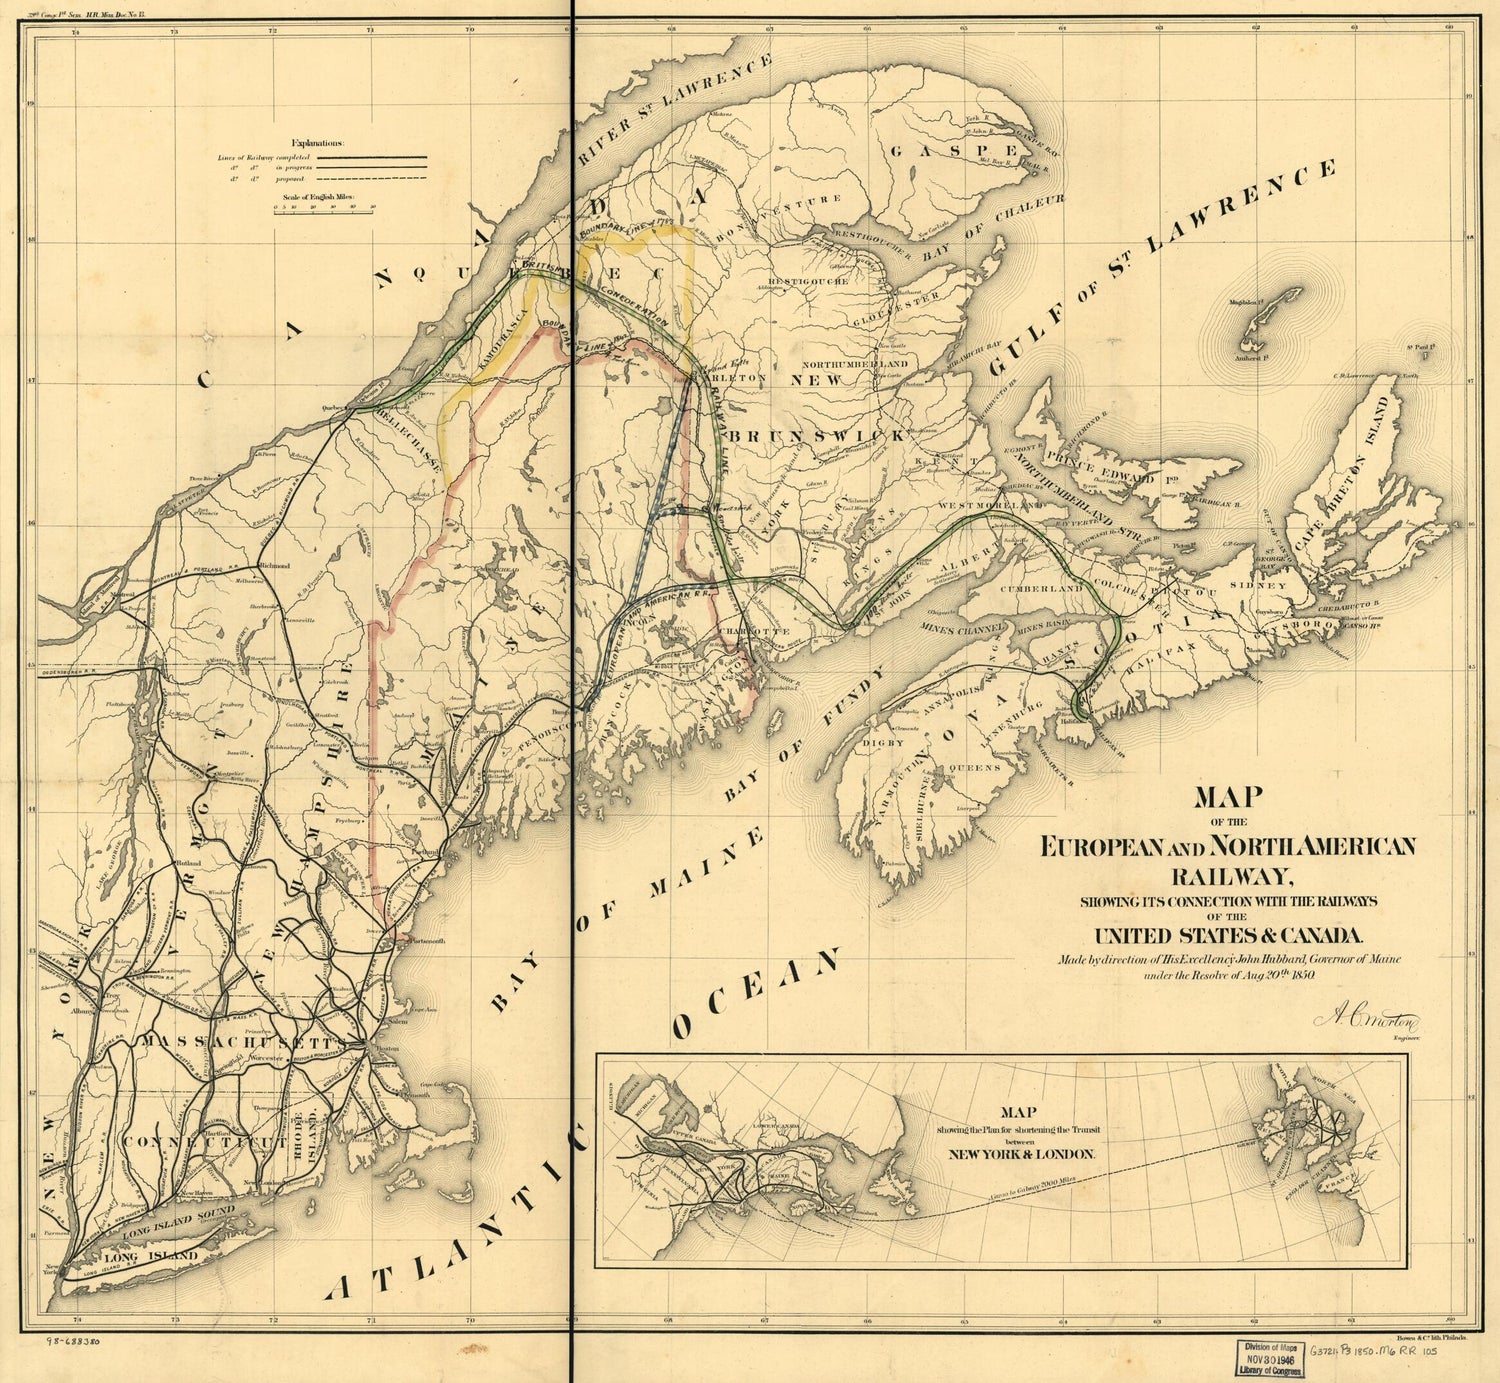 This old map of Map of the European and North American Railway, Showing Its Connection With the Railways of the United States &amp; Canada; Made by Direction of His Excellency John Hubbard, Governor of Maine Under the Resolve of Aug. 20th from 1850 was creat